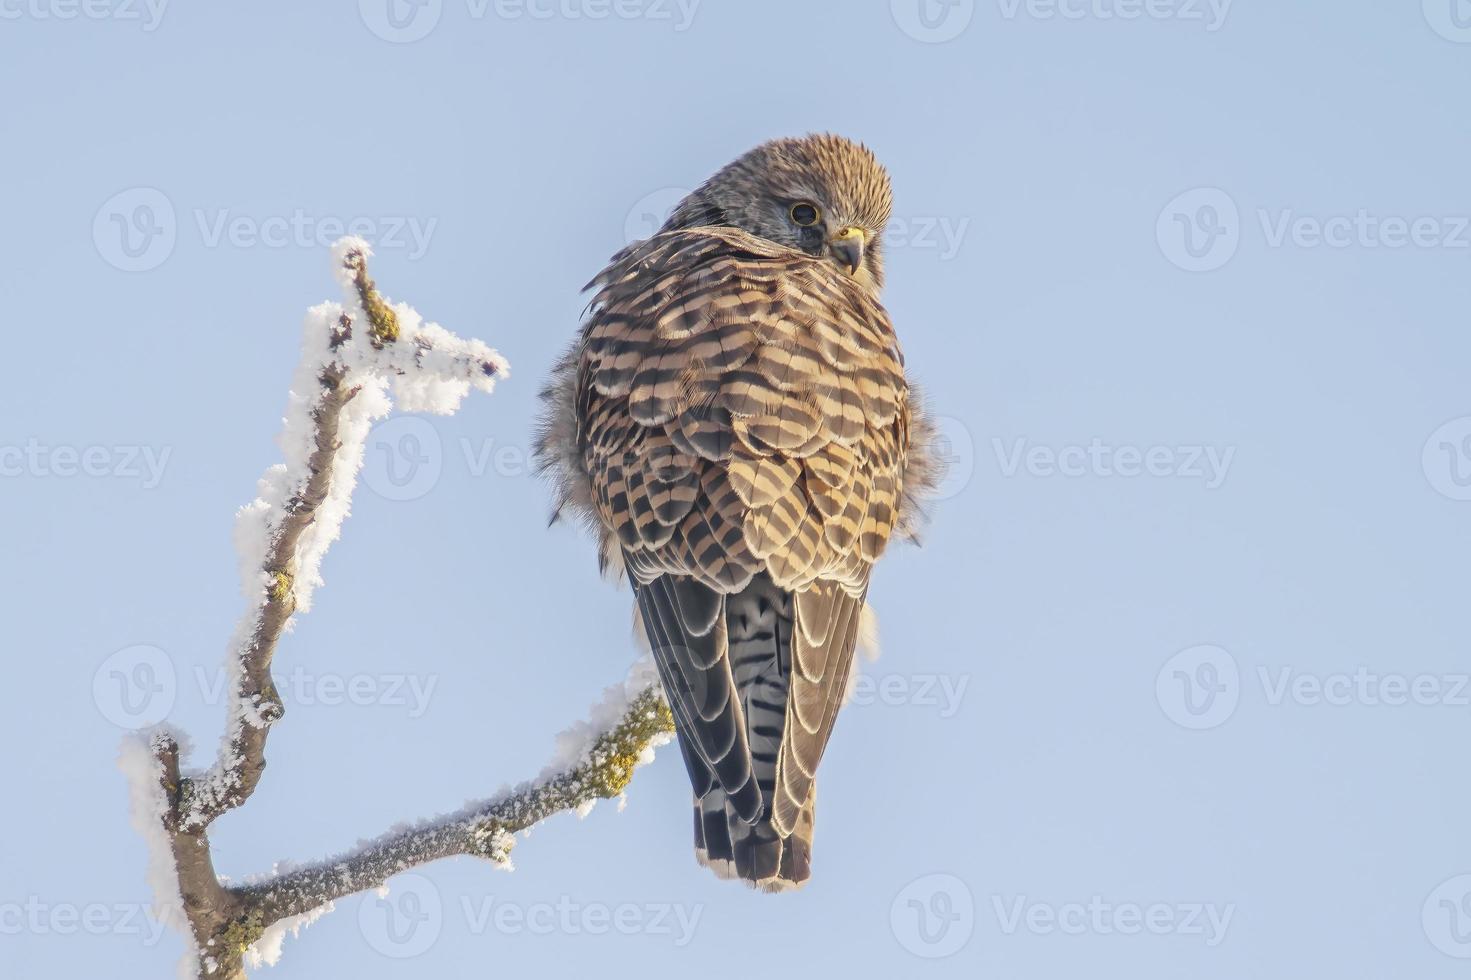 kestrel perches on a snowy branch on a tree in winter photo